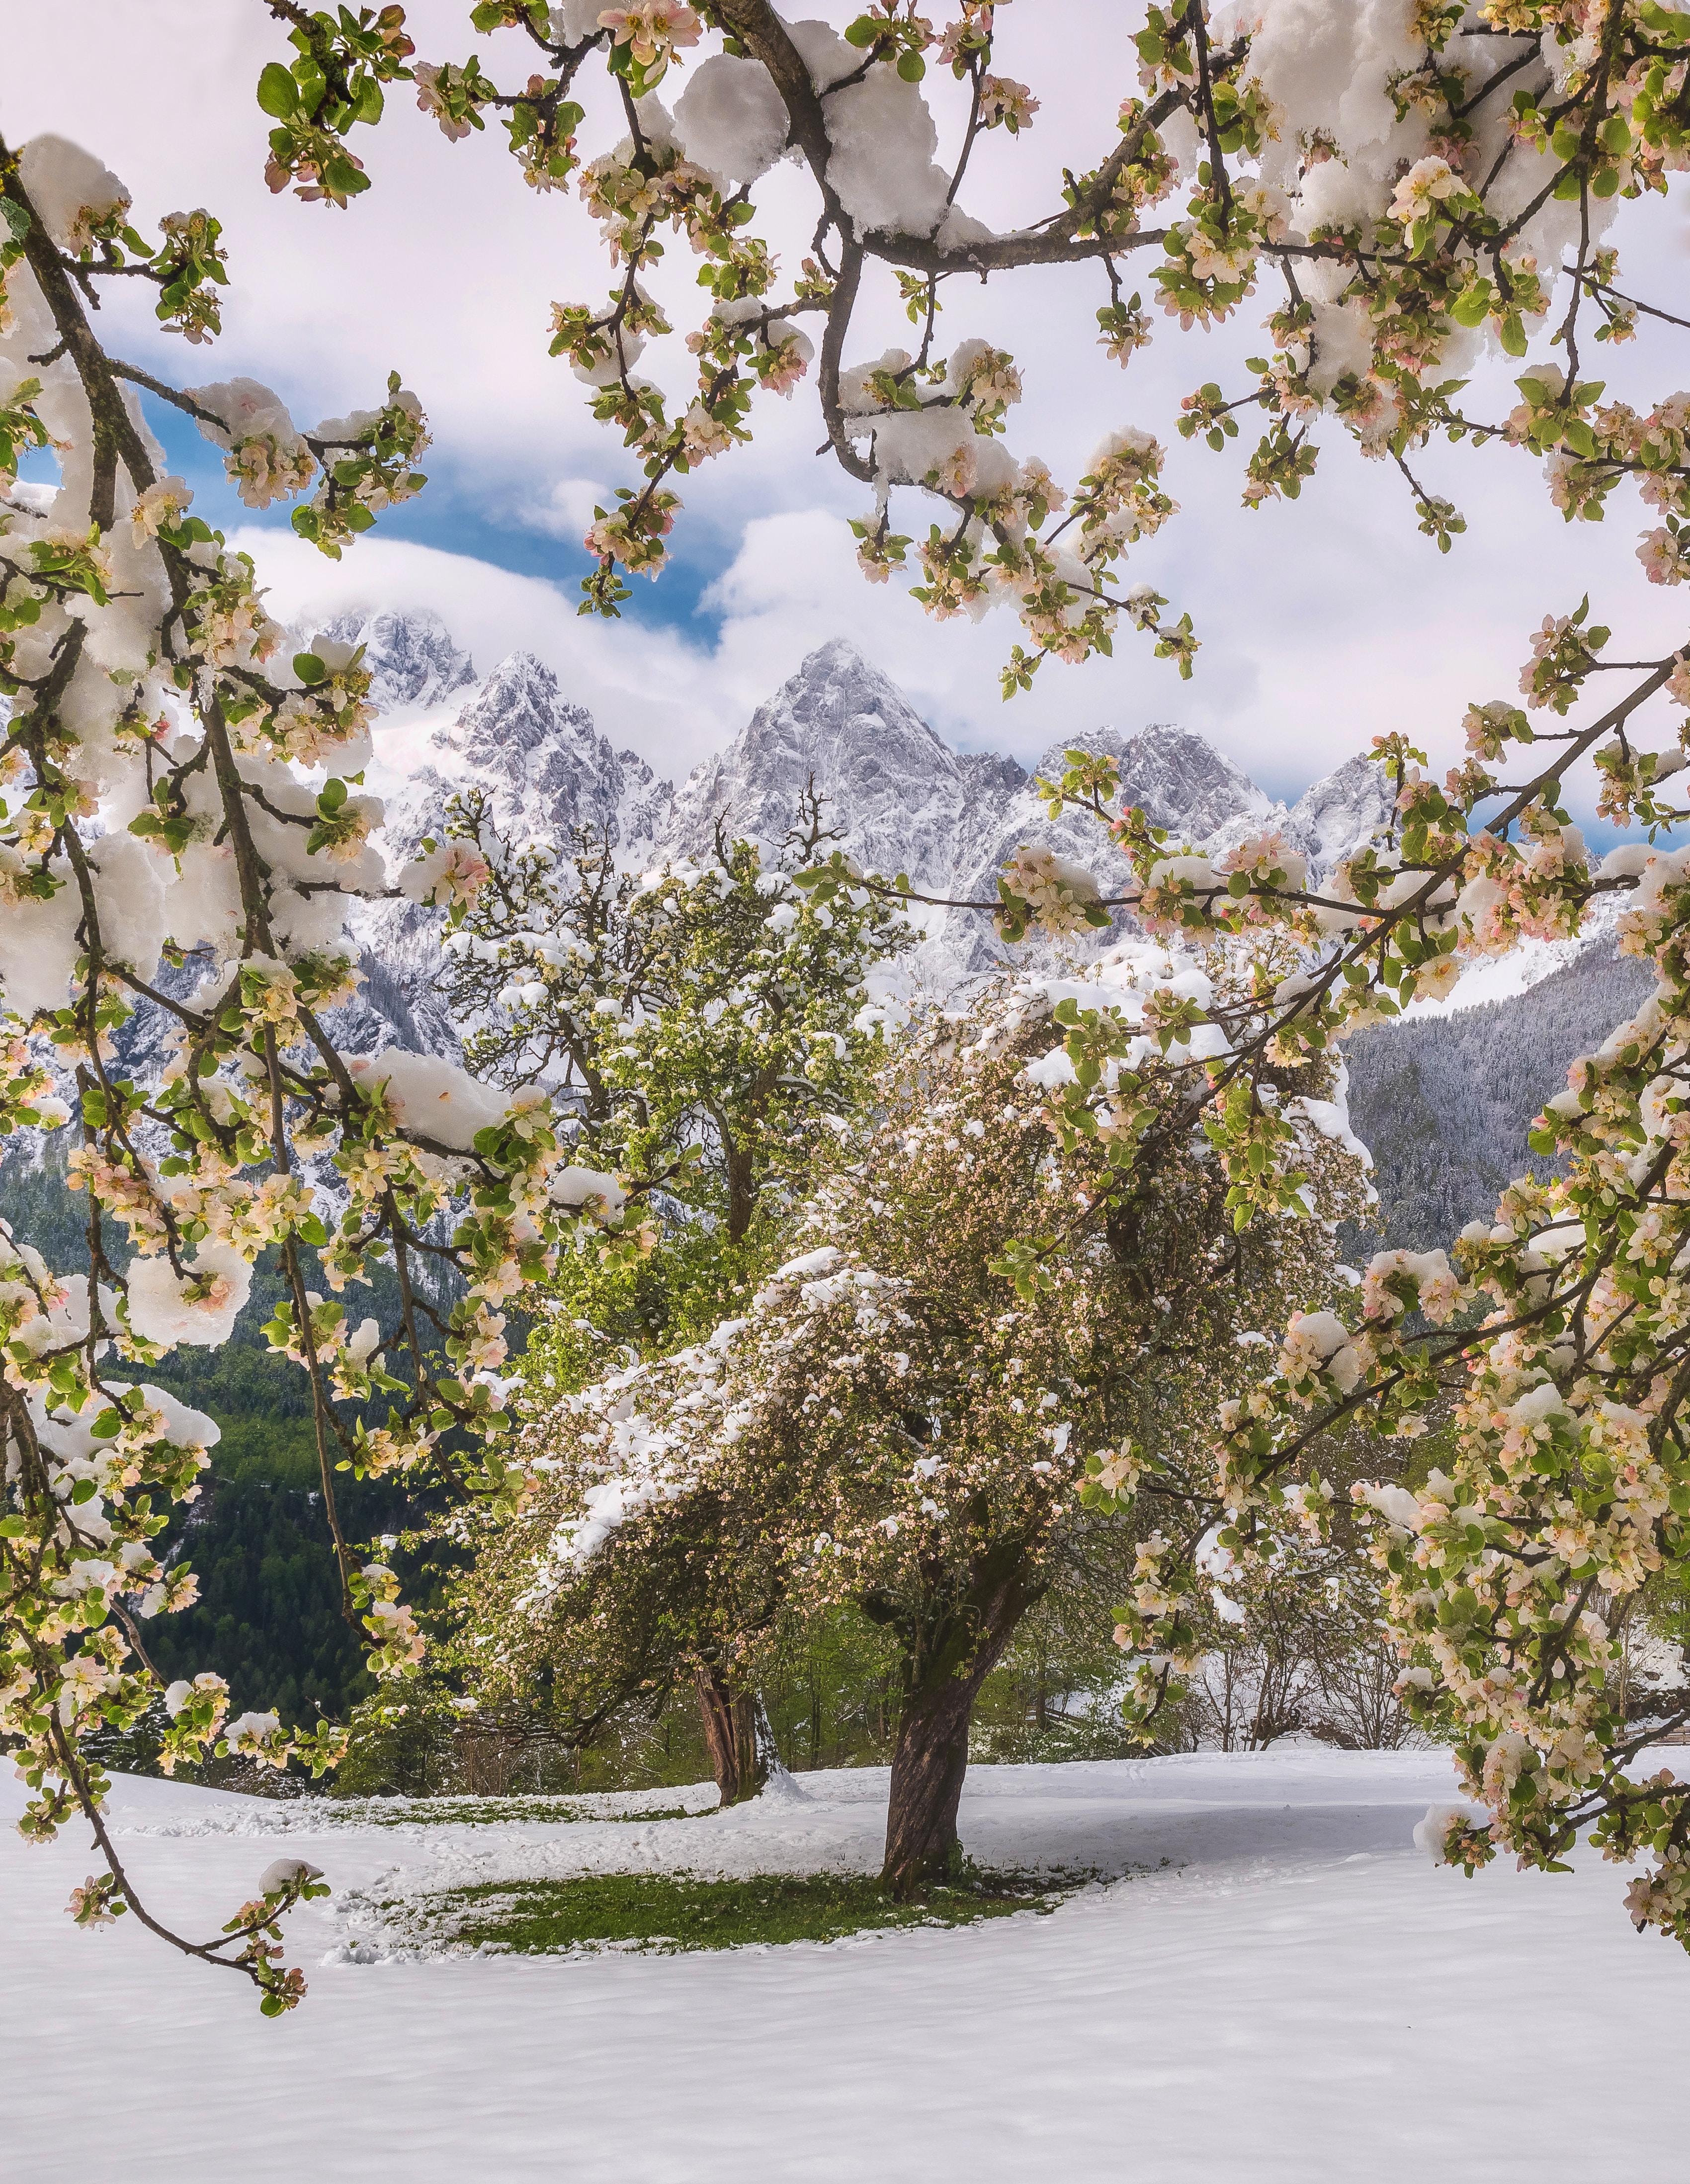 Free HD snow, snow covered, nature, flowers, trees, mountains, snowbound